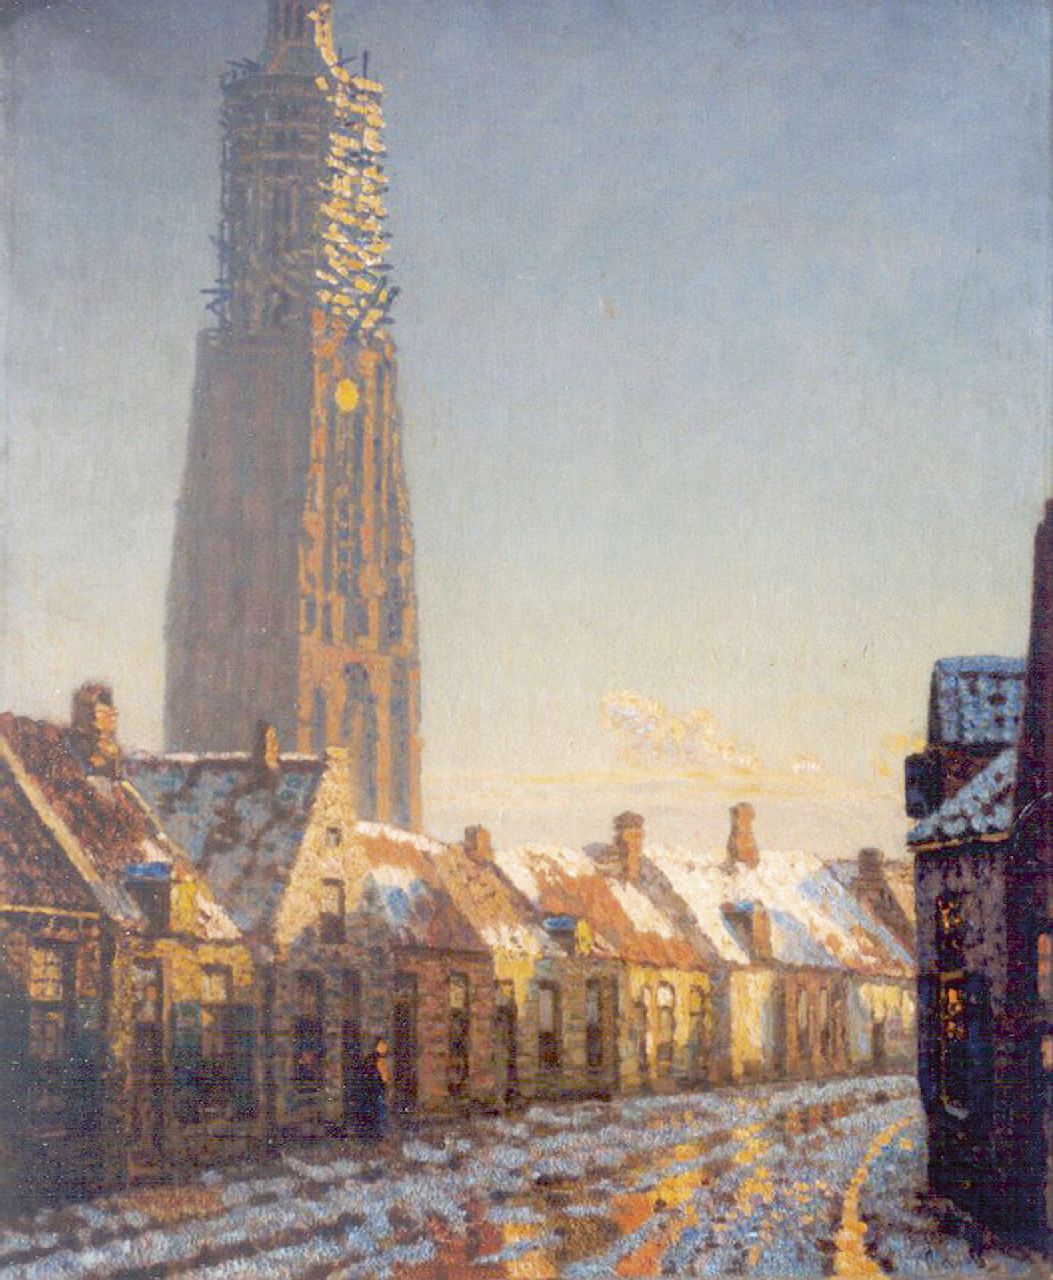 Bakels R.S.  | Reinier Sybrand Bakels, A view of Amersfoort in winter, oil on canvas 83.9 x 68.2 cm, signed l.r.